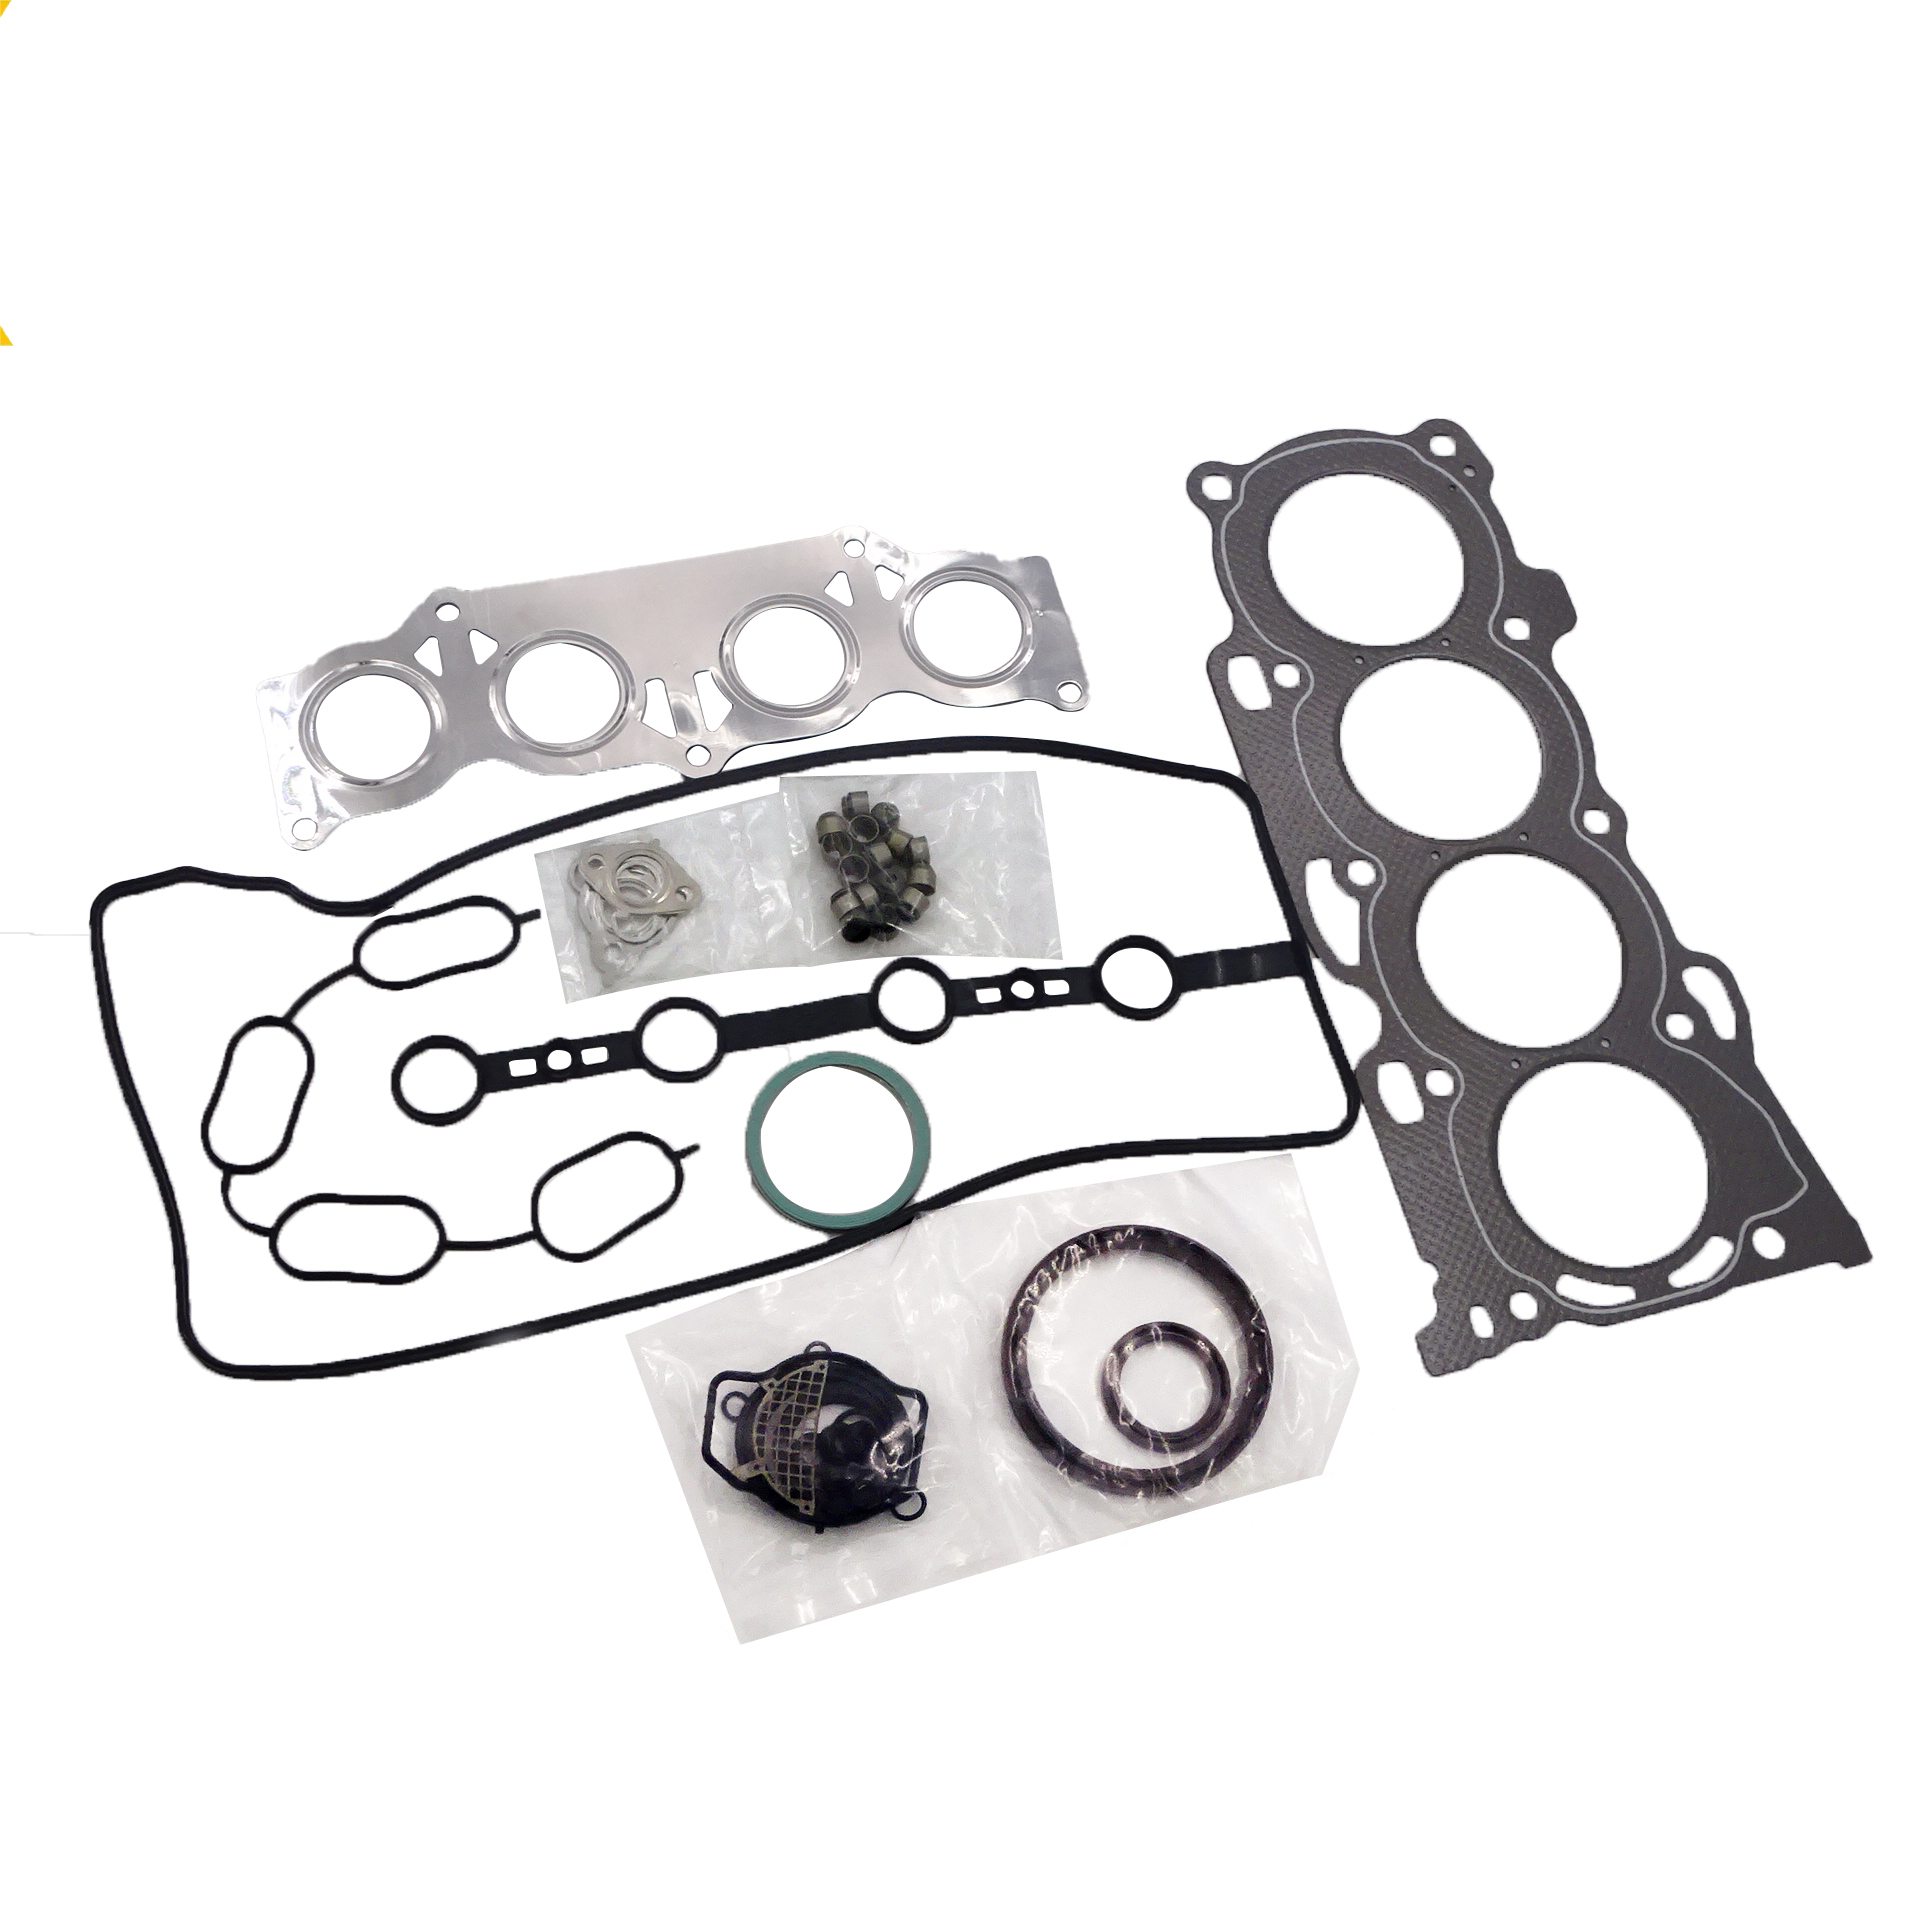 Head Gasket Kit for Toyota Camry 2.4L(ACV40) 2006-2015 OE:04111-0H302